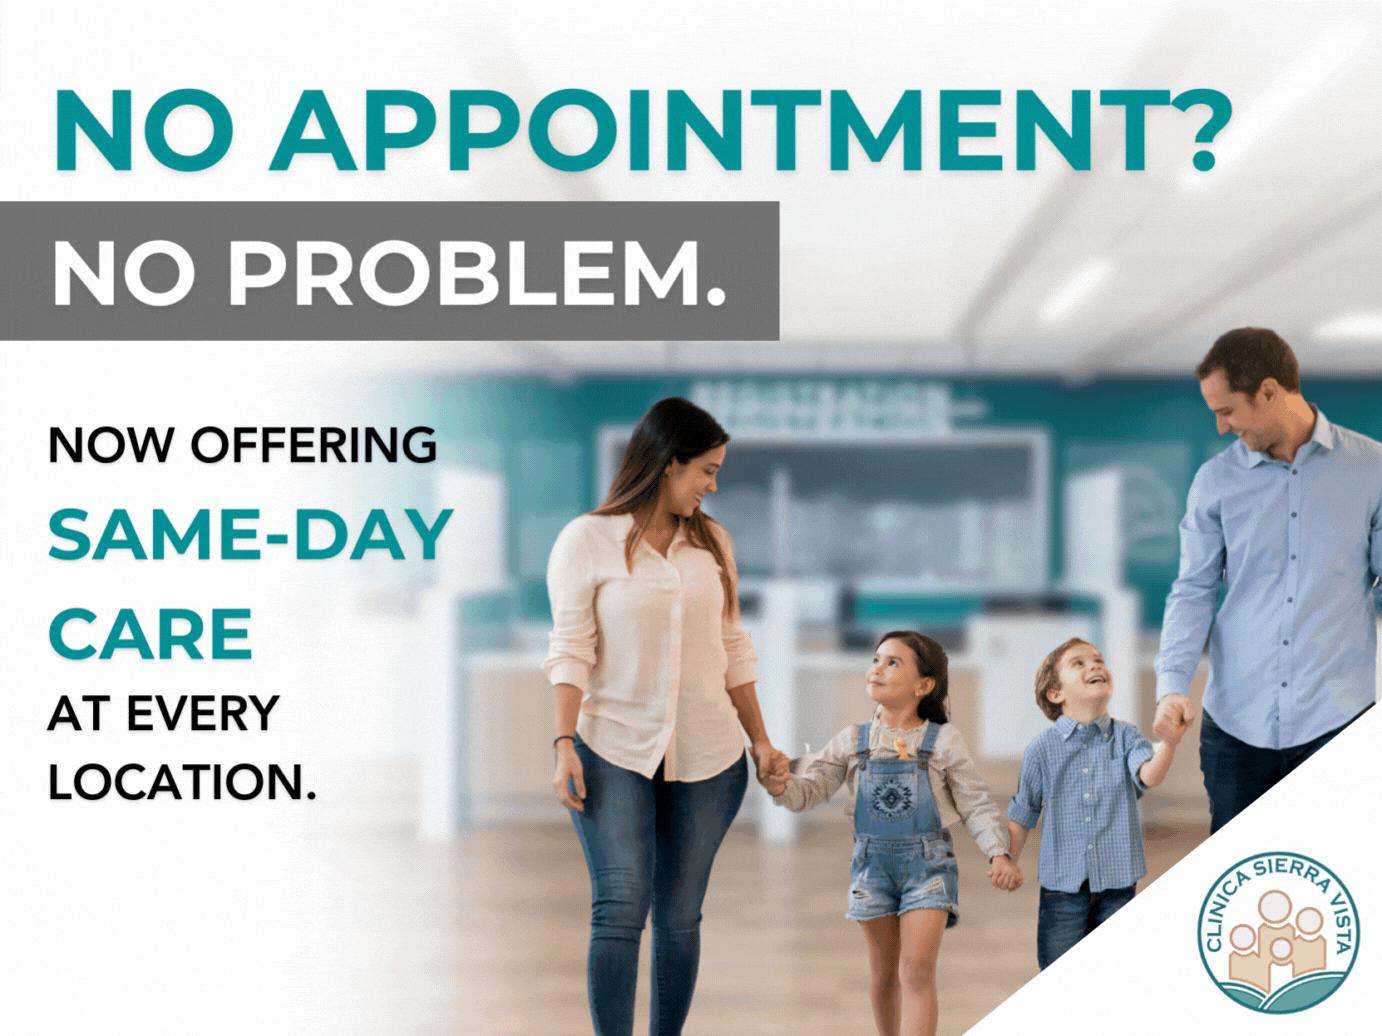 No Appointment? No Problem! Now offering same-day access to care at every location